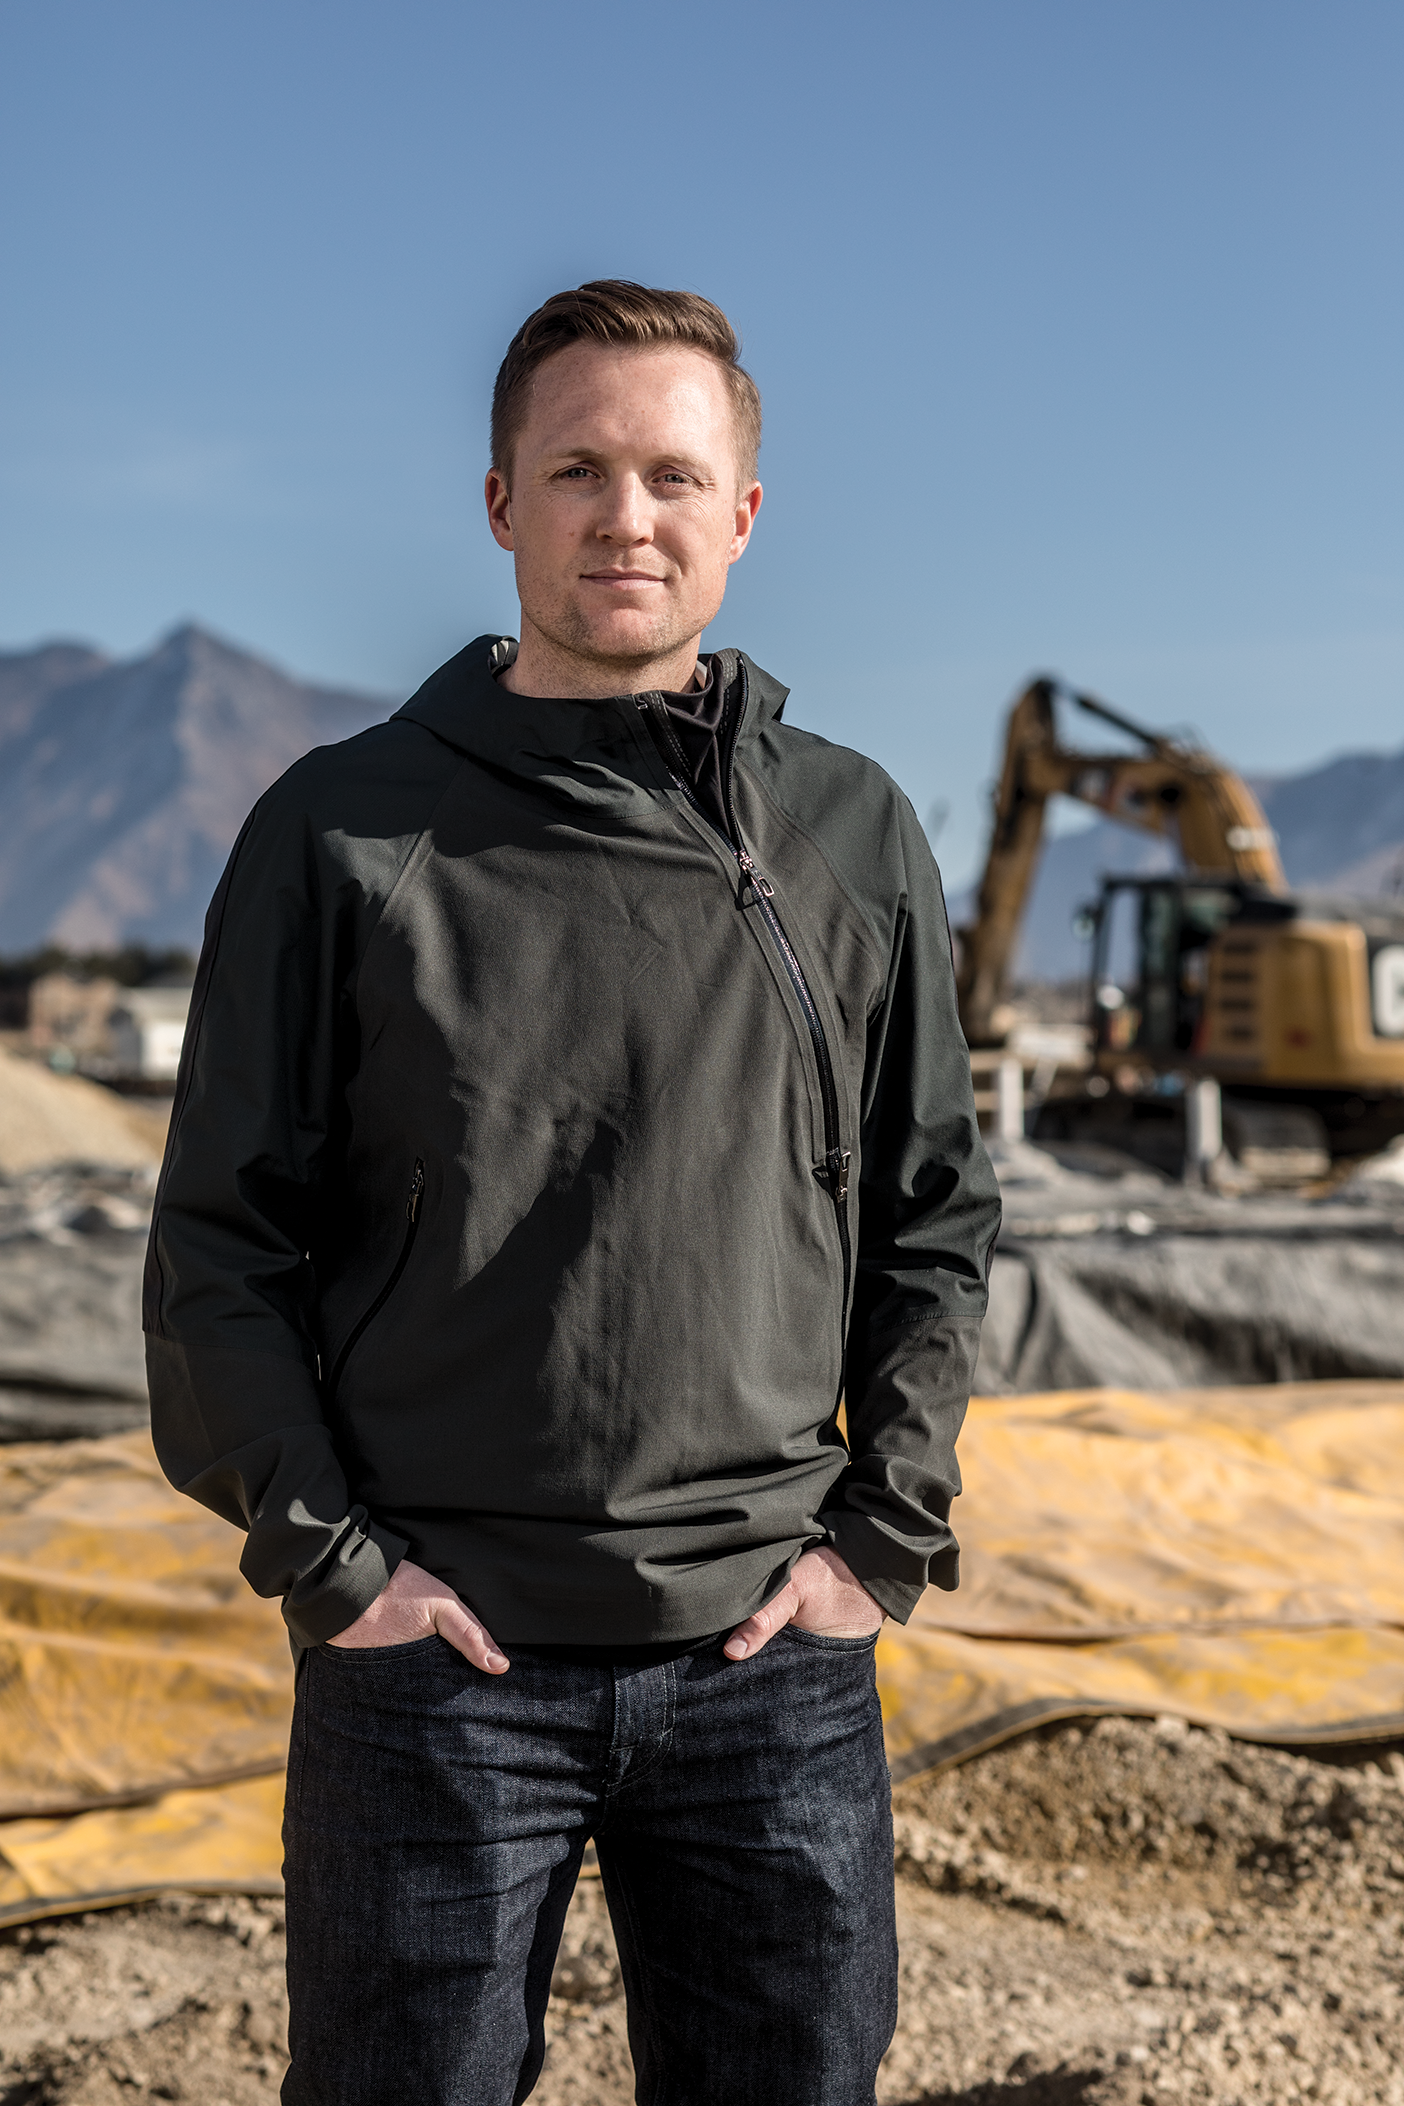 Eric Rea, founder of Podium, poses outside at the construction site of the company's new $10 million facility in Lehi.